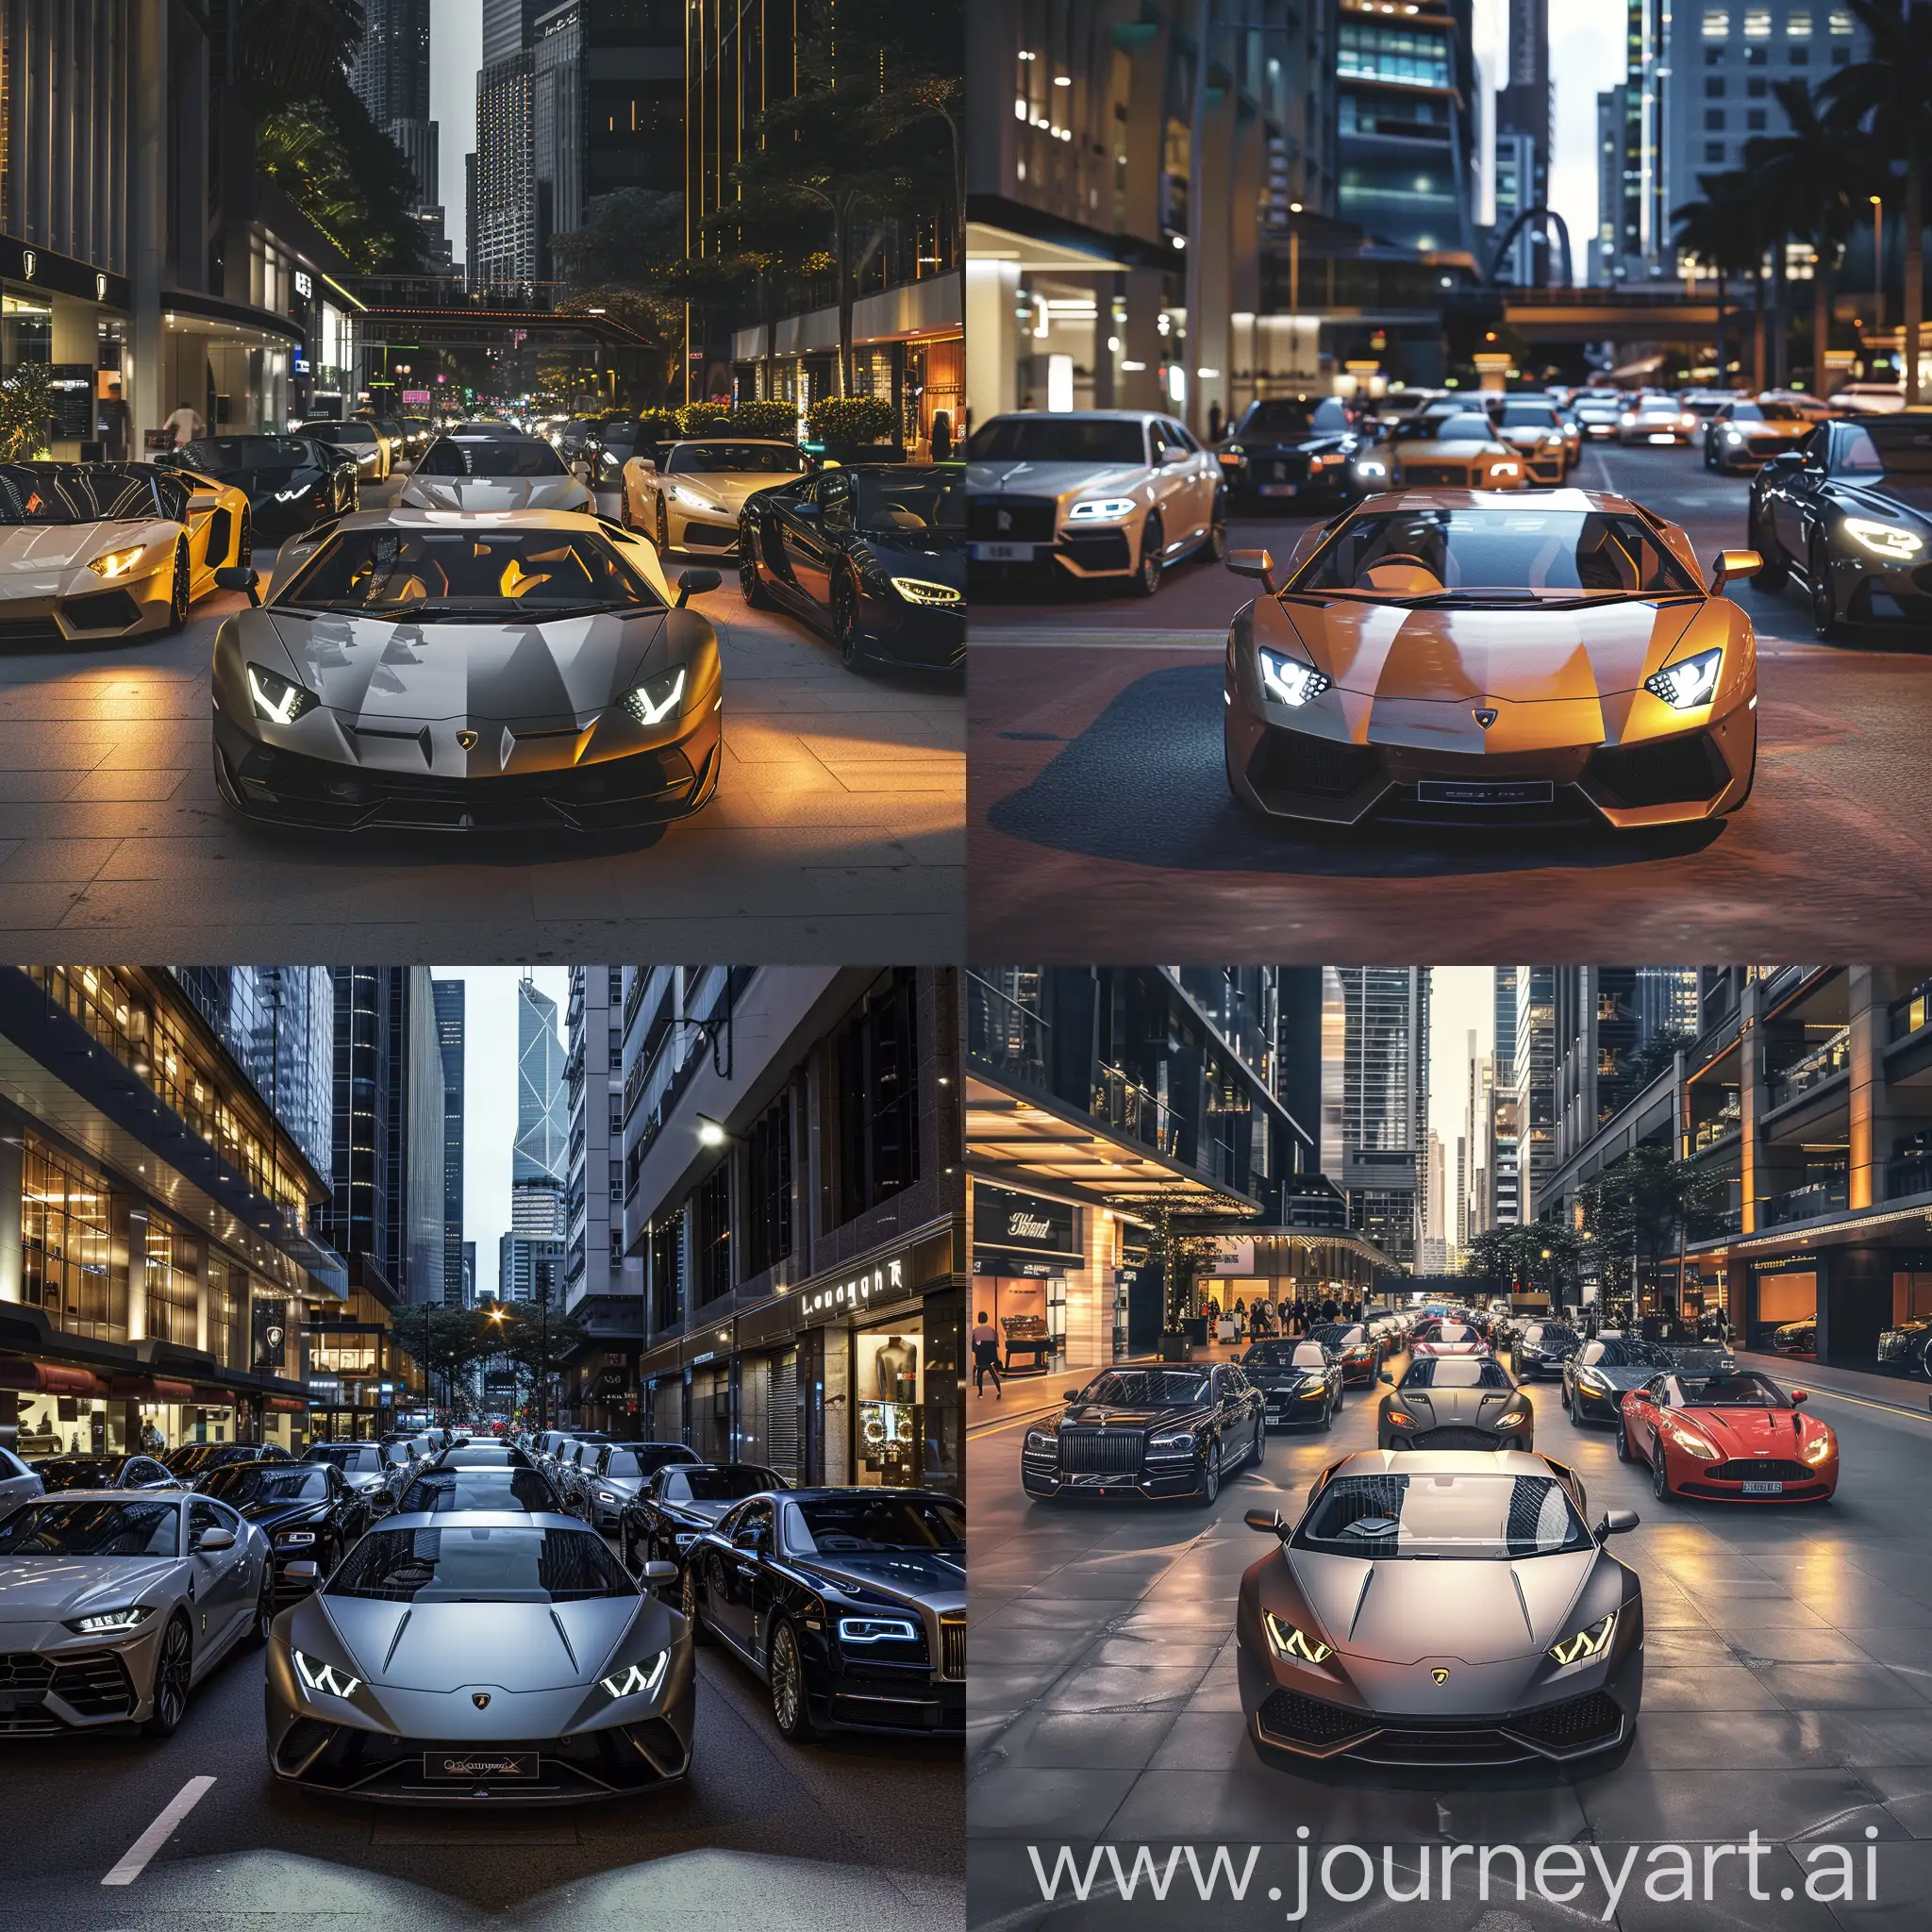 In the heart of a chic urban boulevard, a stunning Lamborghini takes center stage, surrounded by a magnificent assembly of luxury cars, including Rolls-Royces, Ferraris, Bugattis, and Aston Martins. The scene is alive with vibrant, dynamic lighting that highlights each curve and detail of the sleek, high-gloss finishes of the vehicles. Stylish urban architecture frames the scene, with modern skyscrapers and elegant storefronts adding to the ambiance of sophistication. The atmosphere exudes an unparalleled sense of exclusivity and opulence, capturing the very essence of an elite automotive lifestyle. The composition is a visual symphony of high-end automotive excellence, accentuated by the interplay of shadows and reflections on the pristine surfaces of the cars.